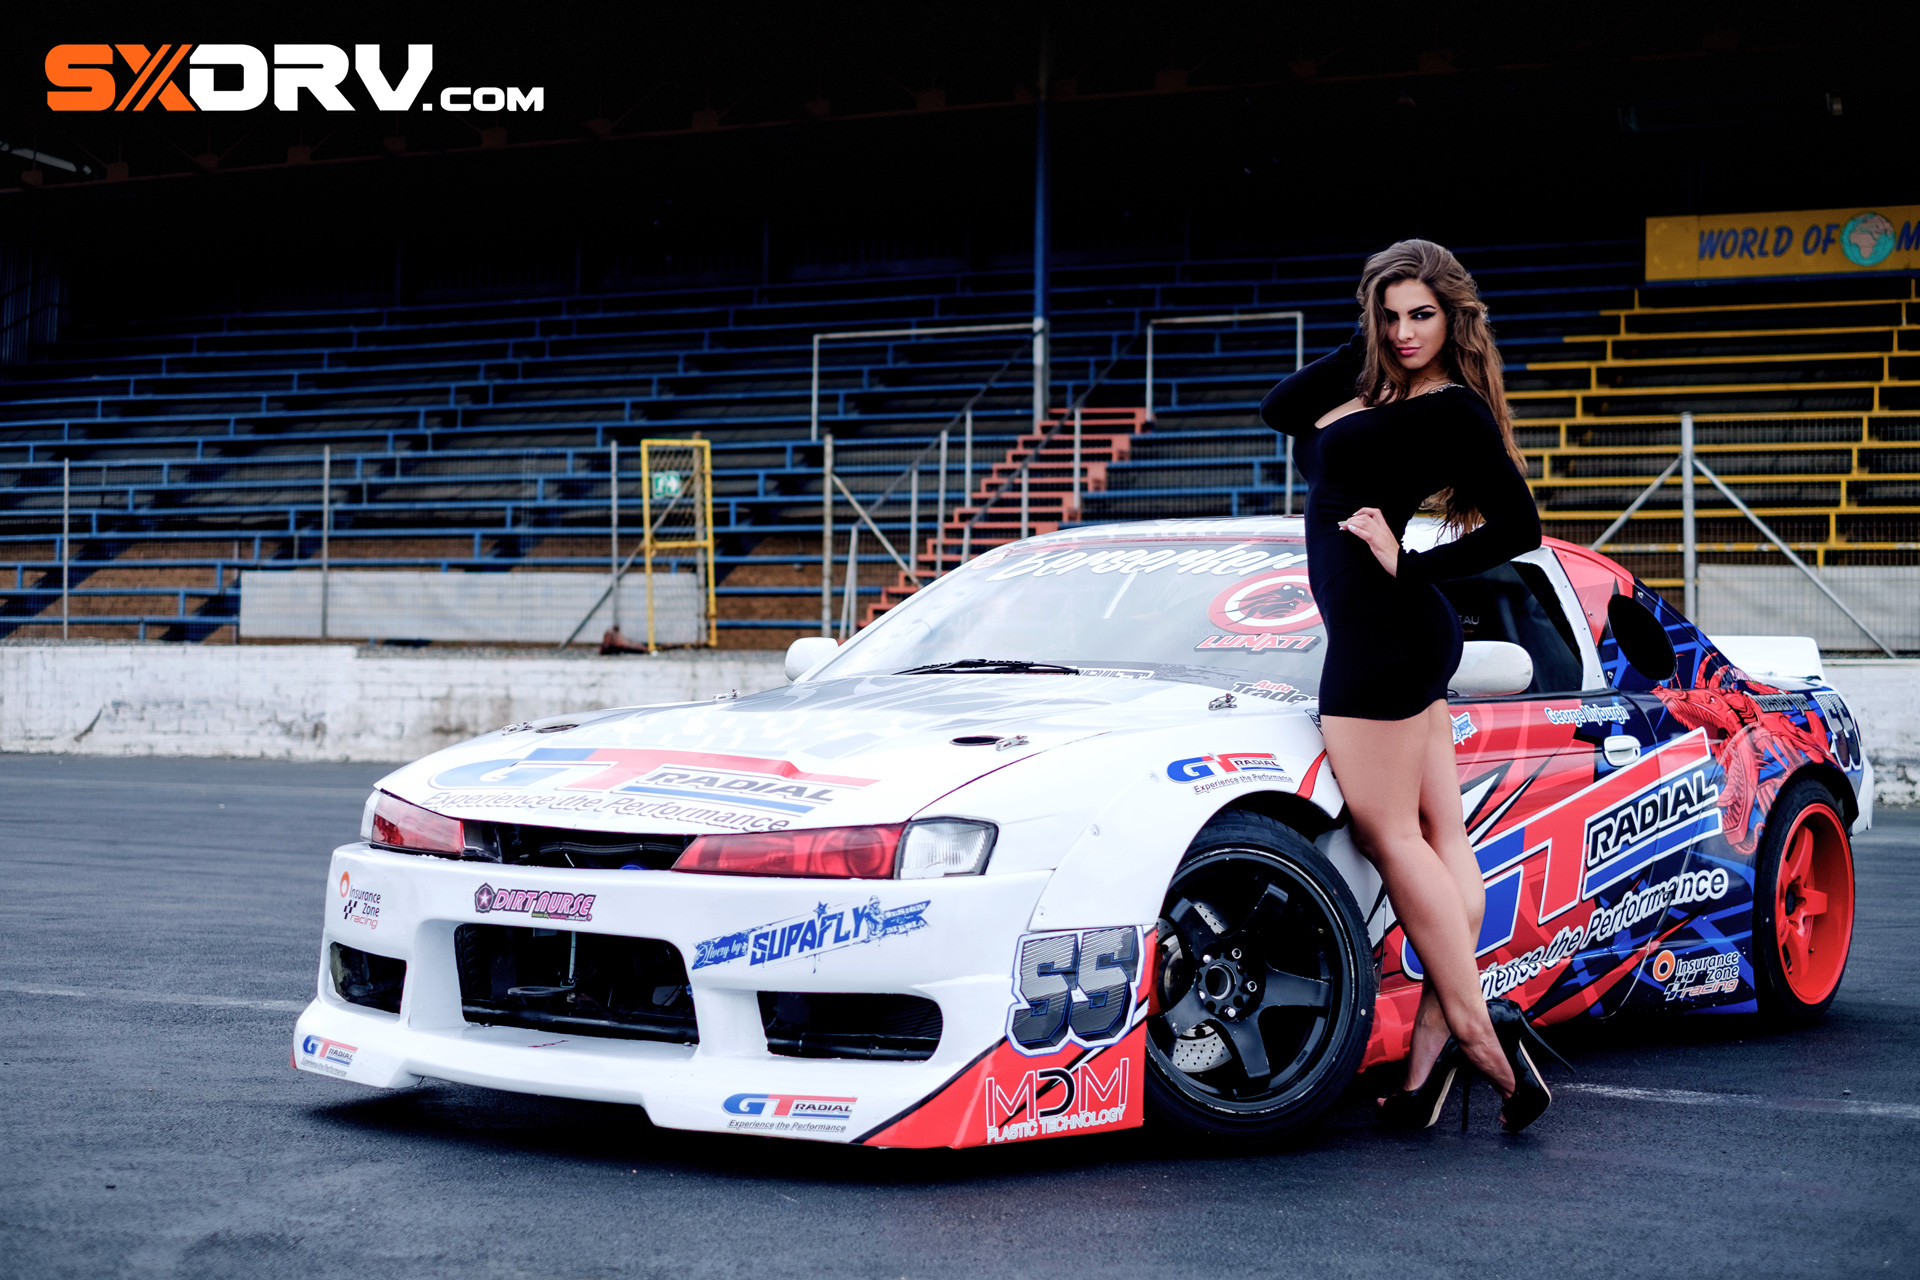 The face-melting, crazy as hell, Nissan Silvia S14, better known as Berserk...